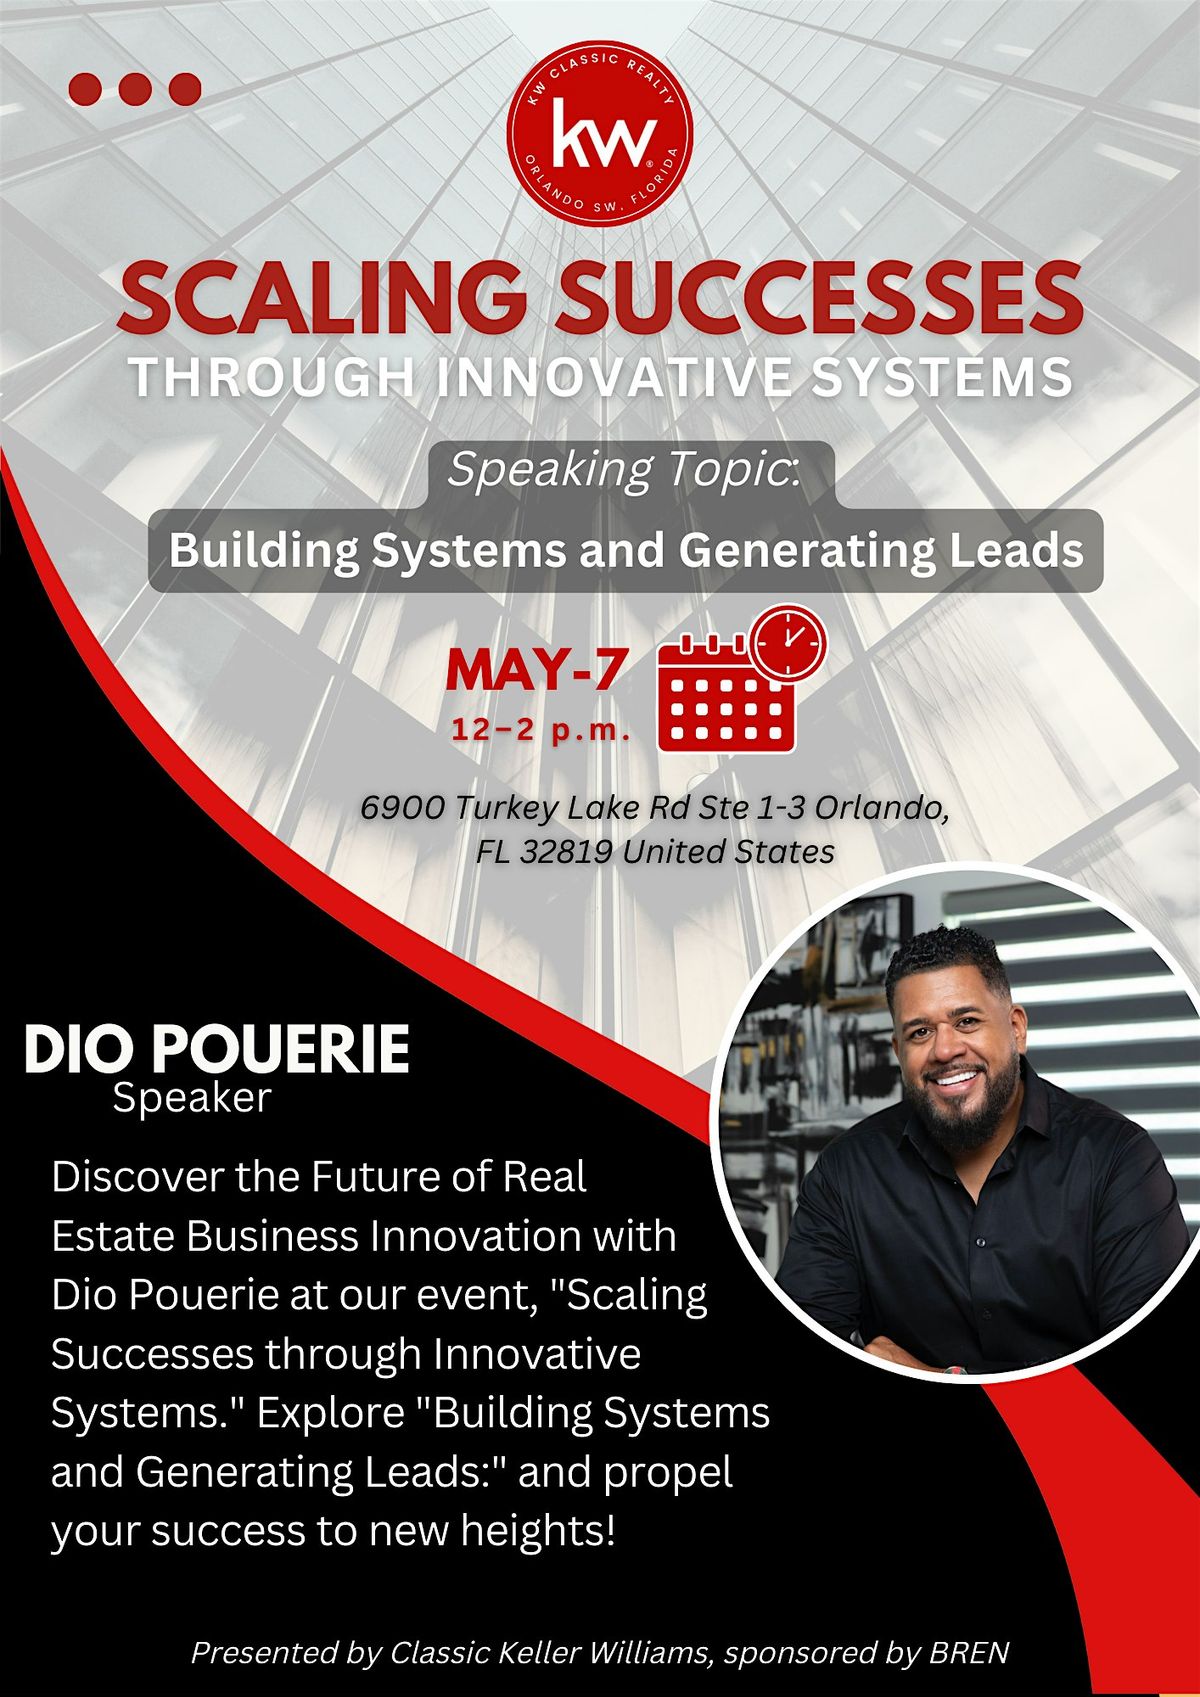 SCALING SUCCESS THROUGH INNOVATIVE SYSTEMS